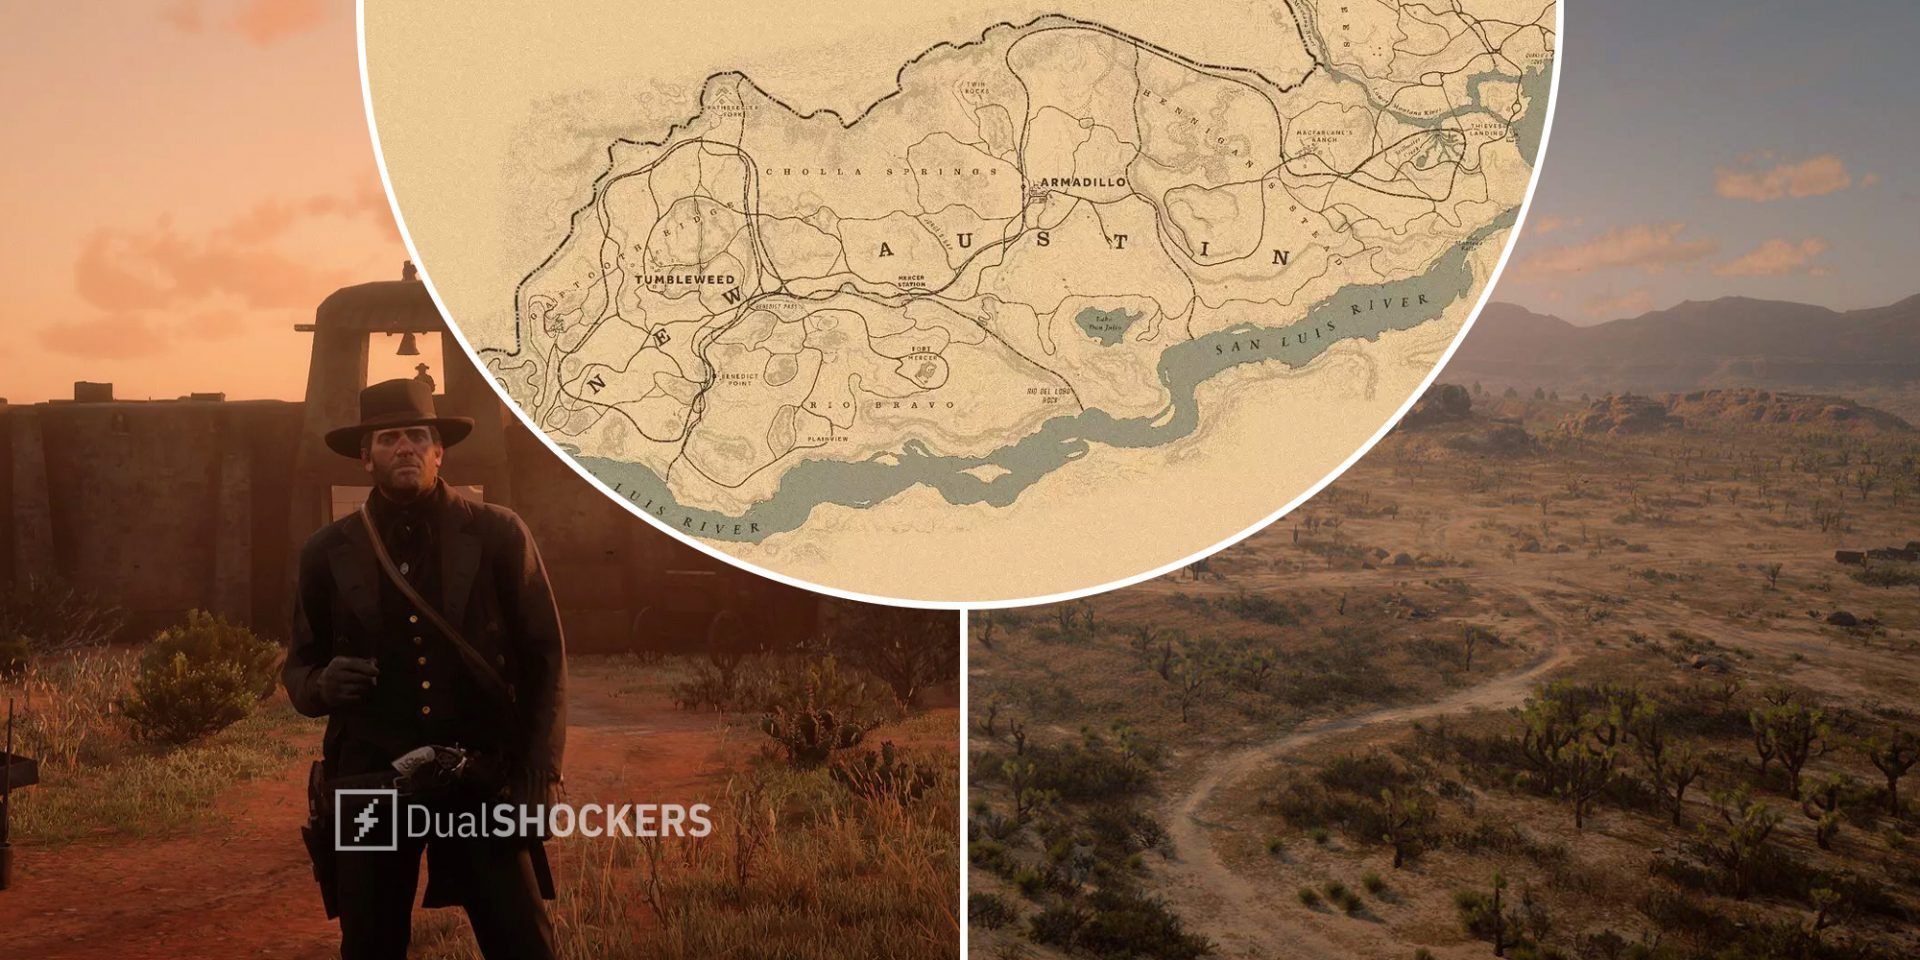 Red Dead Redemption 2 Arthur Morgan in New Austin on left, New Austin map in middle, New Austin scenery on right